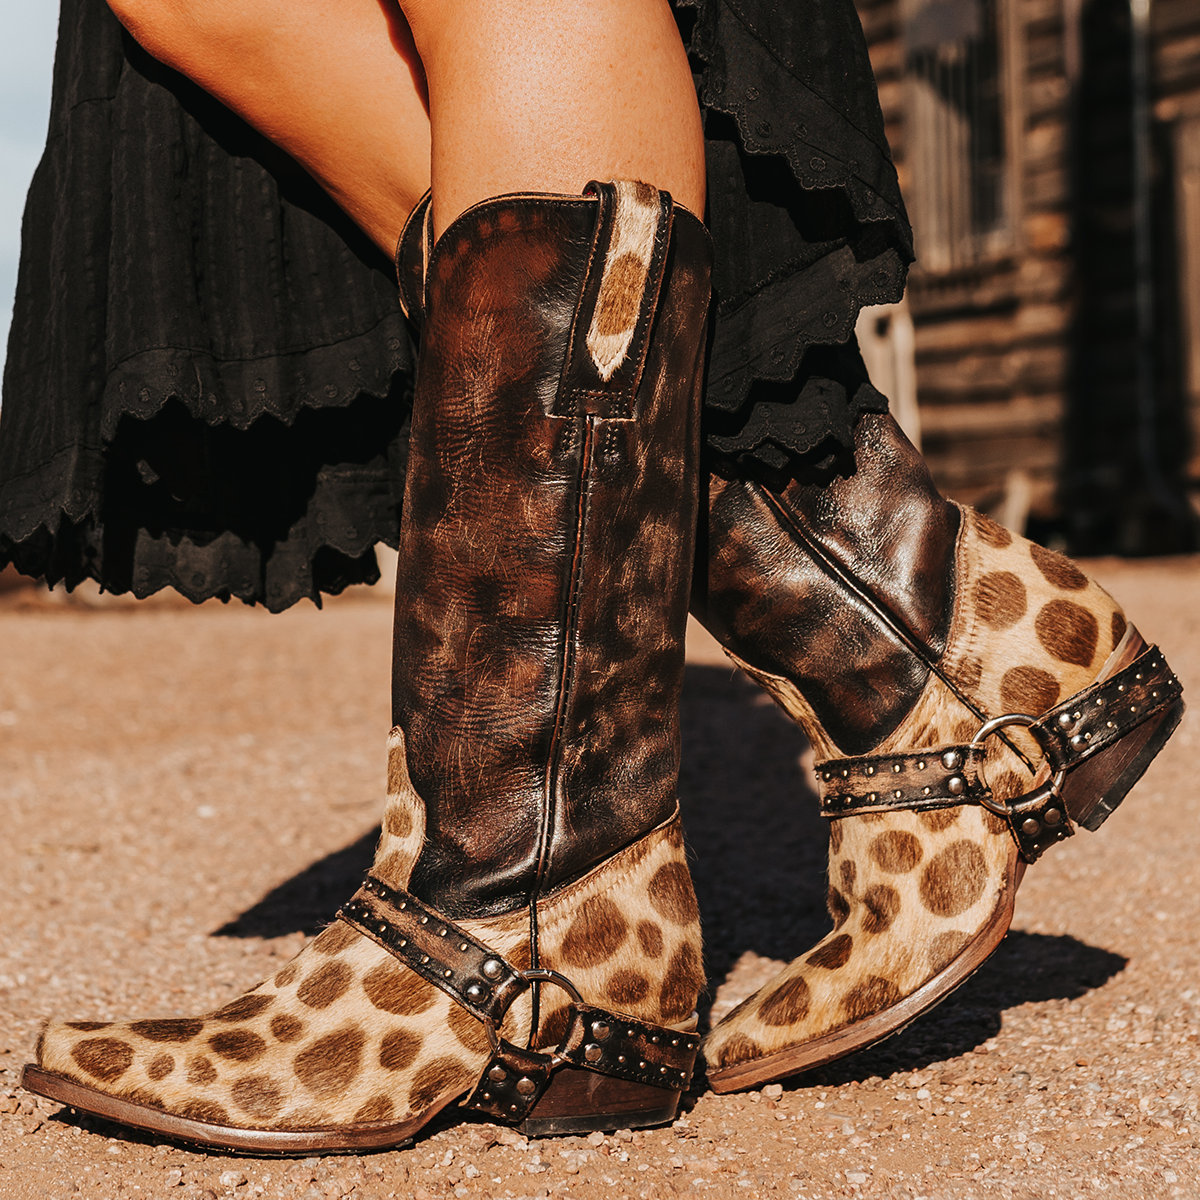 FREEBIRD women's Lusitano leopard western boot with embellished harness and snip toe